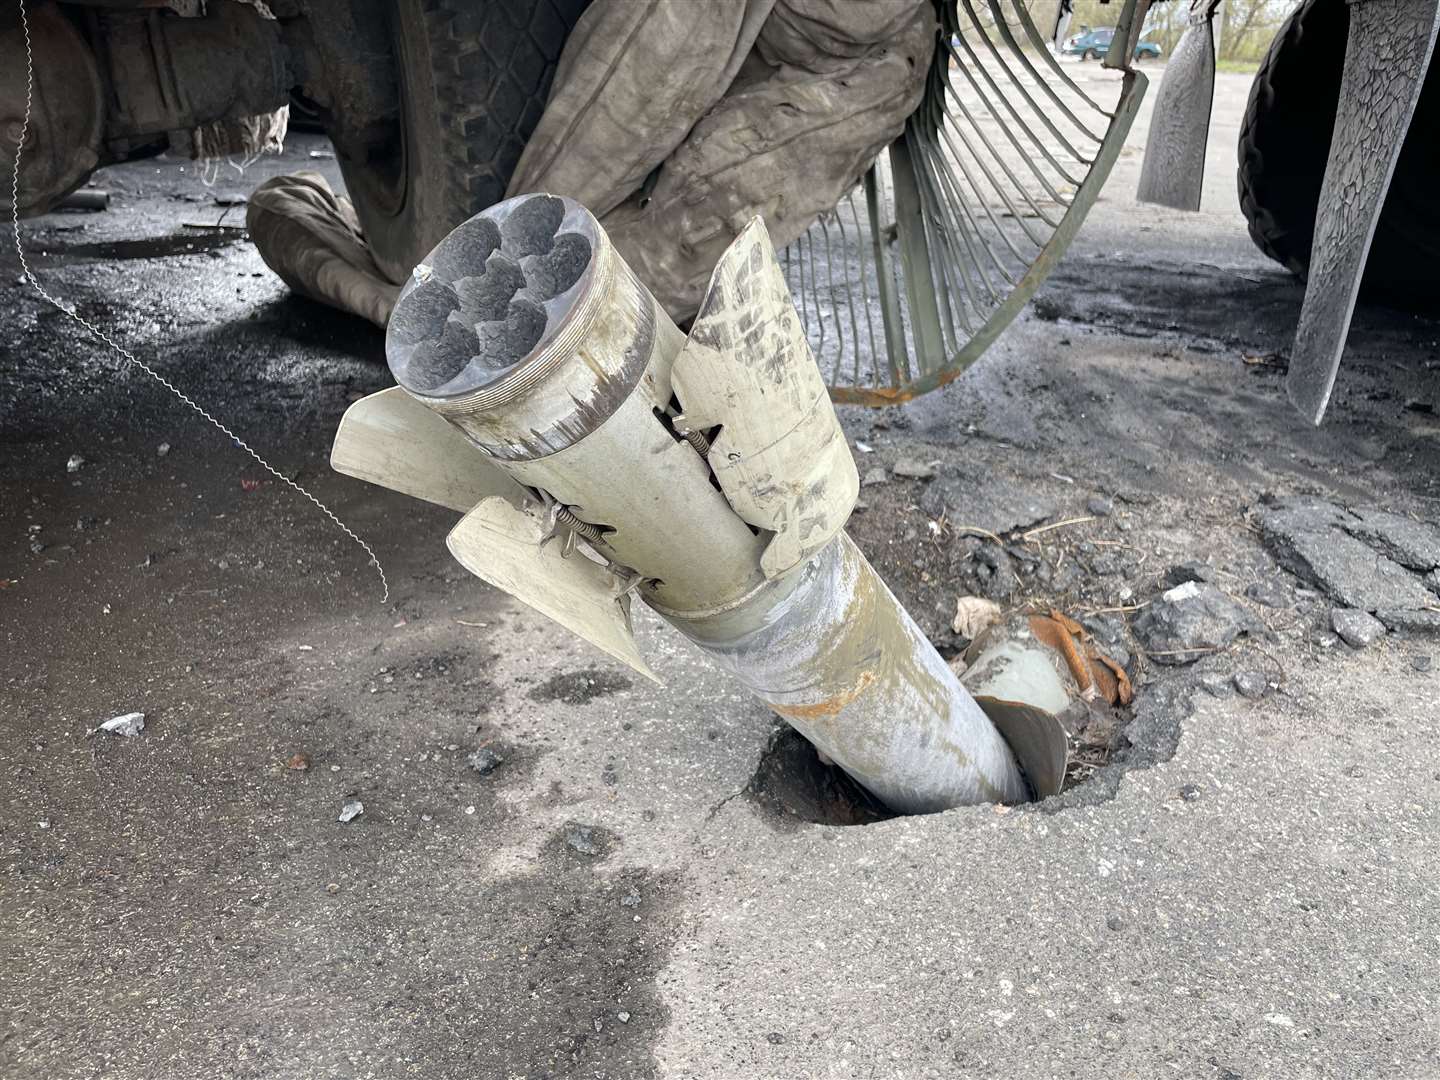 An unexploded missile in Ukraine. Photo: Sophie Alexander